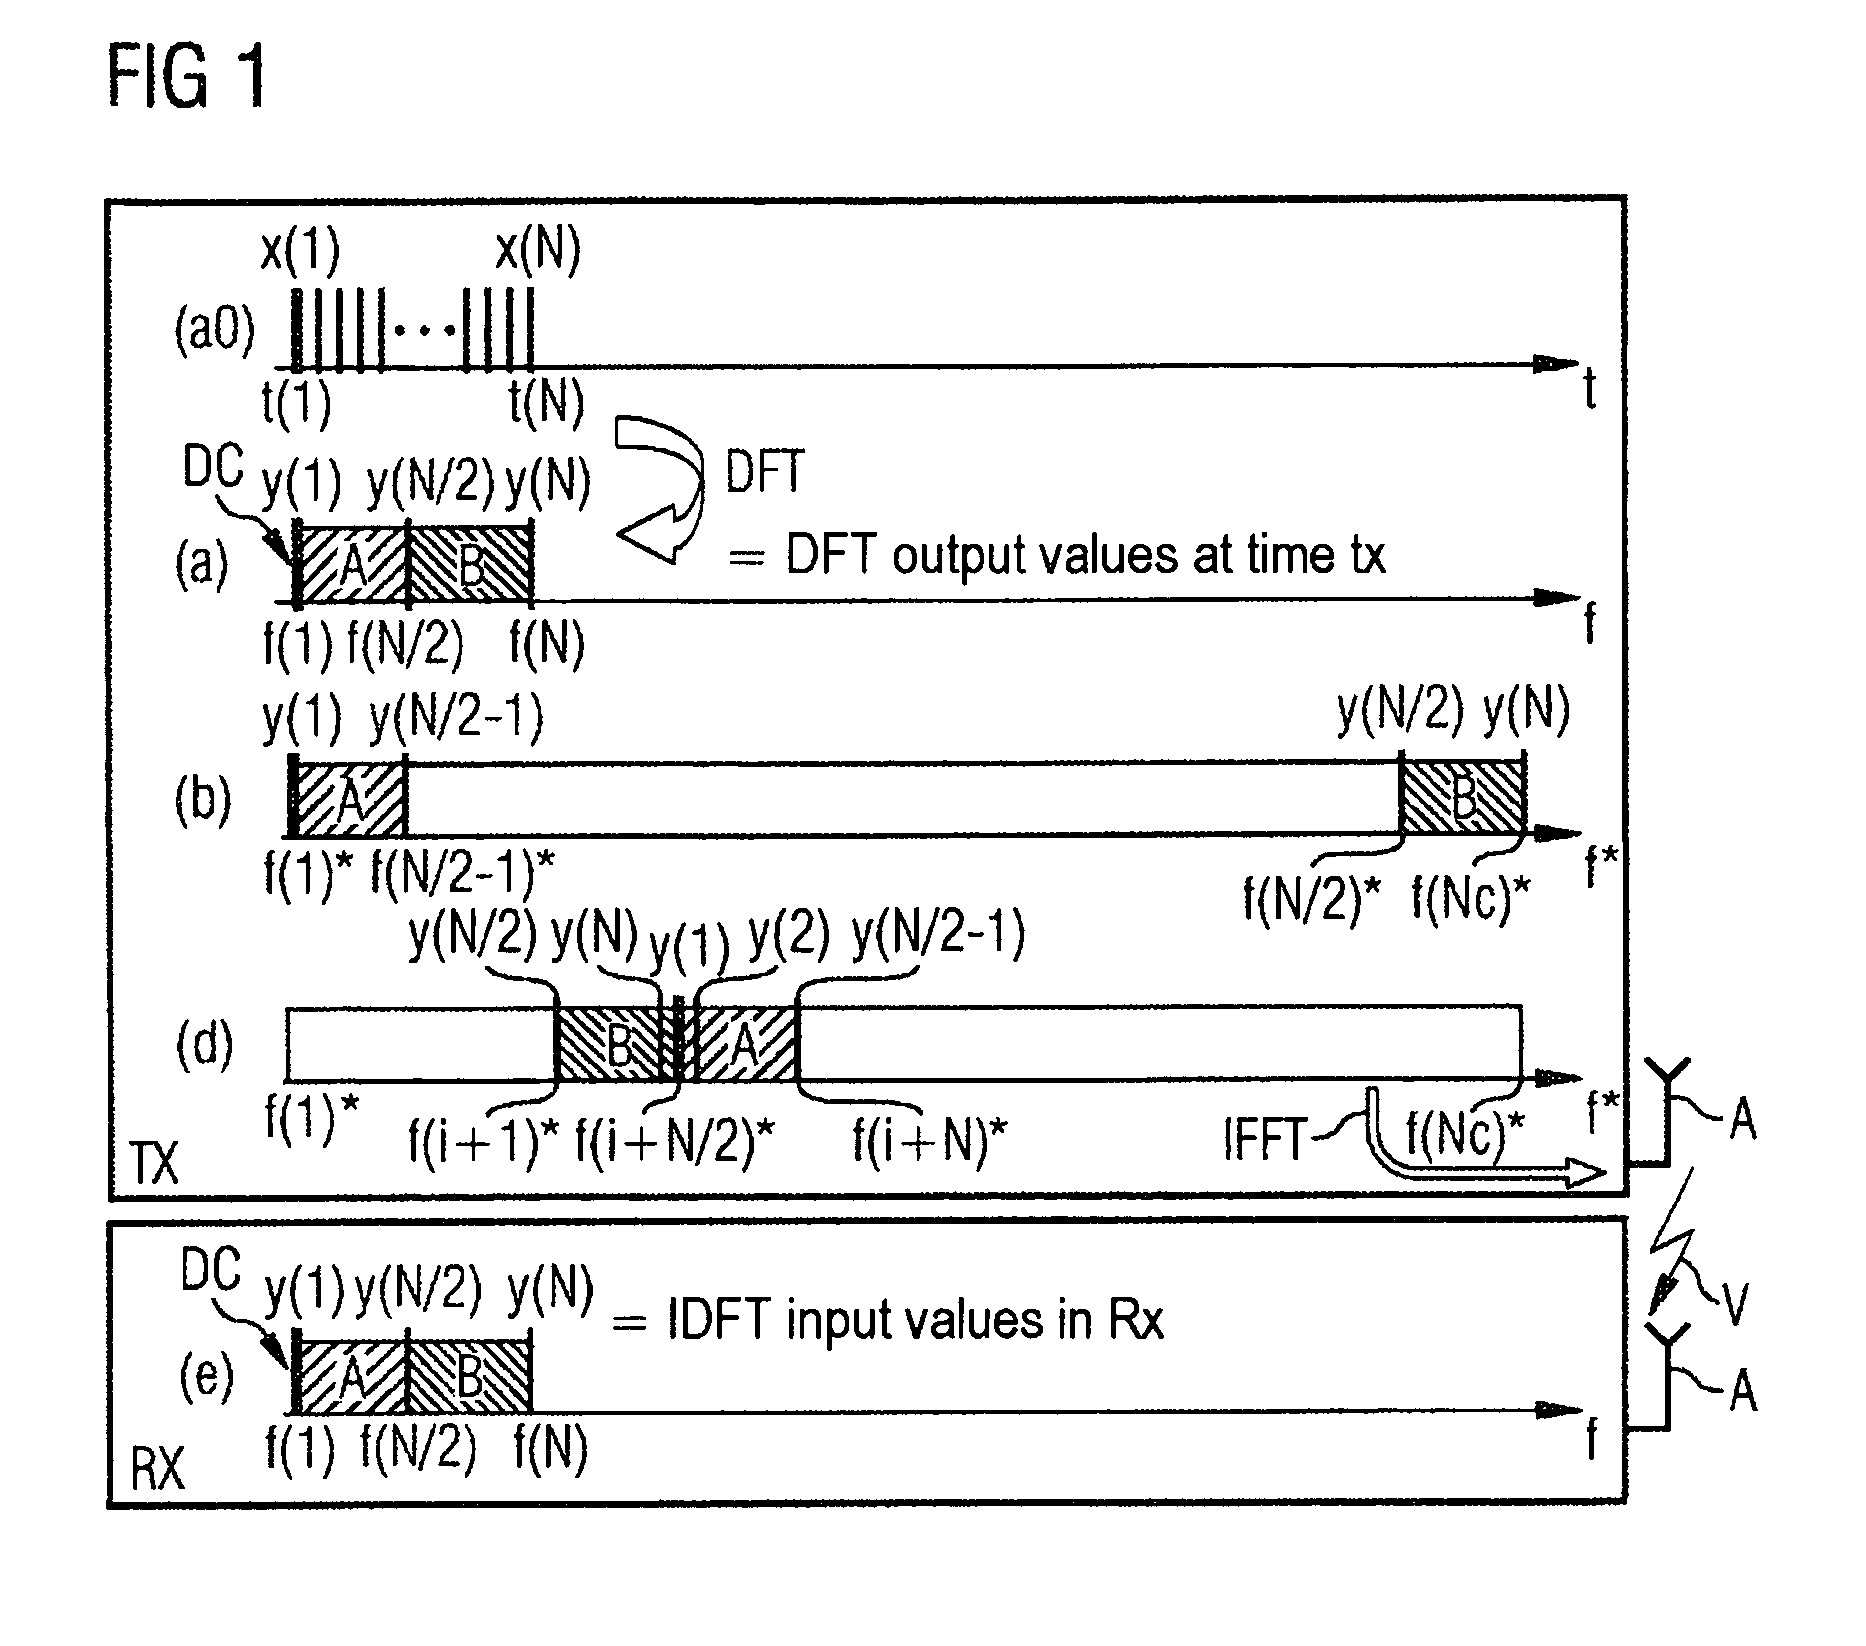 Method and/or OFDM device for SC-FDMA data transmission